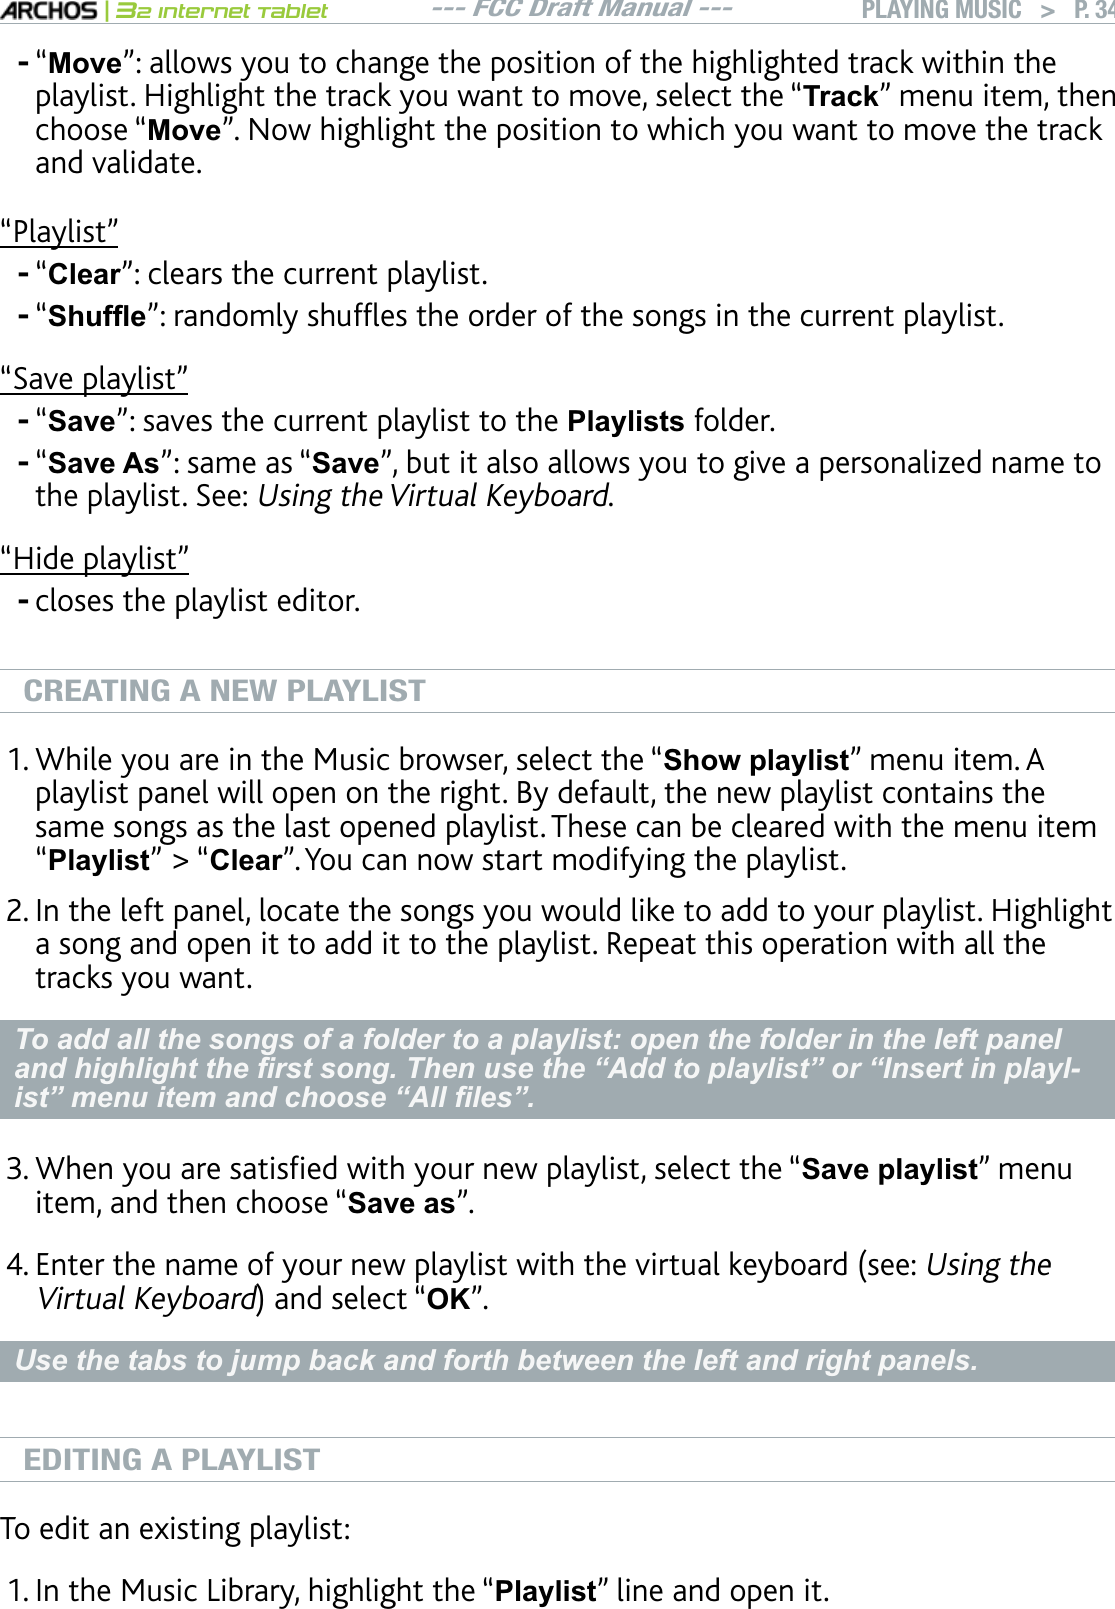 --- FCC Draft Manual ---|32 Internet TabletPLAYING MUSIC   &gt; P. 34“Move”: allows you to change the position of the highlighted track within the playlist. Highlight the track you want to move, select the “7UDFN” menu item, then choose “Move”. Now highlight the position to which you want to move the track and validate.“Playlist”“Clear”: clears the current playlist.“6KXIÀHnTCPFQON[UJWHÓGUVJGQTFGTQHVJGUQPIUKPVJGEWTTGPVRNC[NKUV“Save playlist”“Save”: saves the current playlist to the Playlists folder.“Save As”: same as “SavenDWVKVCNUQCNNQYU[QWVQIKXGCRGTUQPCNK\GFPCOGVQthe playlist. See: Using the Virtual Keyboard.“Hide playlist”closes the playlist editor.CREATING A NEW PLAYLISTWhile you are in the Music browser, select the “Show playlist” menu item. A playlist panel will open on the right. By default, the new playlist contains the same songs as the last opened playlist. These can be cleared with the menu item “Playlist” &gt; “Clear”. You can now start modifying the playlist.+PVJGNGHVRCPGNNQECVGVJGUQPIU[QWYQWNFNKMGVQCFFVQ[QWTRNC[NKUV*KIJNKIJVa song and open it to add it to the playlist. Repeat this operation with all the tracks you want. To add all the songs of a folder to a playlist: open the folder in the left panel DQGKLJKOLJKWWKH¿UVWVRQJ7KHQXVHWKH³$GGWRSOD\OLVW´RU³,QVHUWLQSOD\O-LVW´PHQXLWHPDQGFKRRVH³$OO¿OHV´9JGP[QWCTGUCVKUÒGFYKVJ[QWTPGYRNC[NKUVUGNGEVVJGmSave playlist” menu item, and then choose “Save as”. &apos;PVGTVJGPCOGQH[QWTPGYRNC[NKUVYKVJVJGXKTVWCNMG[DQCTFUGGUsing the Virtual KeyboardCPFUGNGEVmOK”.8VHWKHWDEVWRMXPSEDFNDQGIRUWKEHWZHHQWKHOHIWDQGULJKWSDQHOVEDITING A PLAYLISTTo edit an existing playlist: +PVJG/WUKE.KDTCT[JKIJNKIJVVJGmPlaylist” line and open it.------1.2.3.4.1.